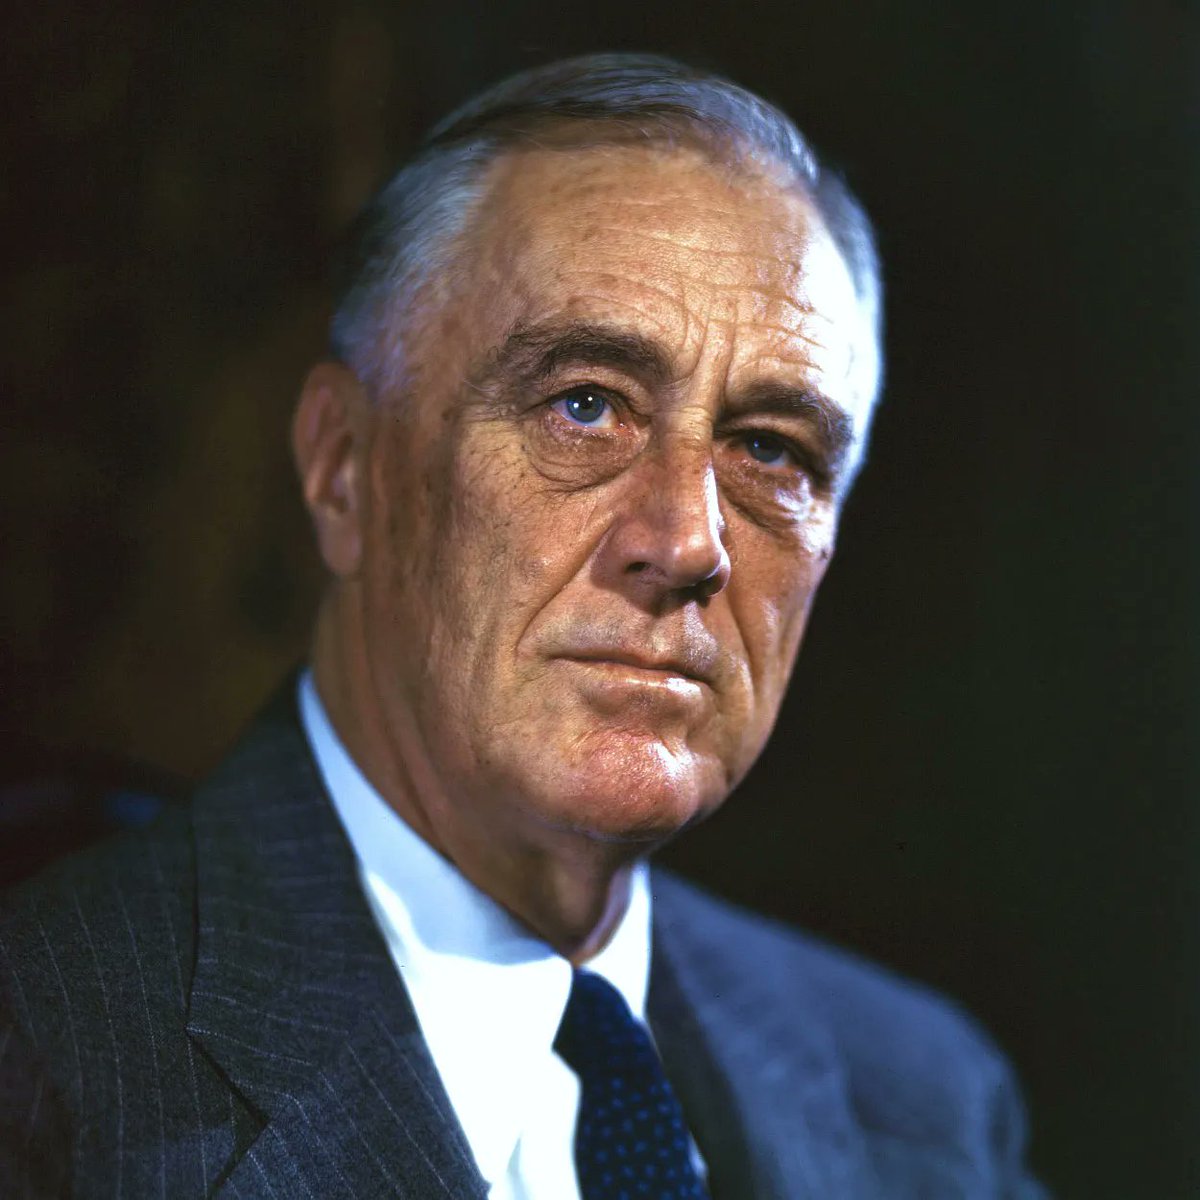 Franklin Delano Roosevelt died 79 years ago today. He is the only American president who truly stands as a peer of Abraham Lincoln. He was a titanic figure, arguably the most important human being of the 20th century because he was the greatest champion for freedom in an era…